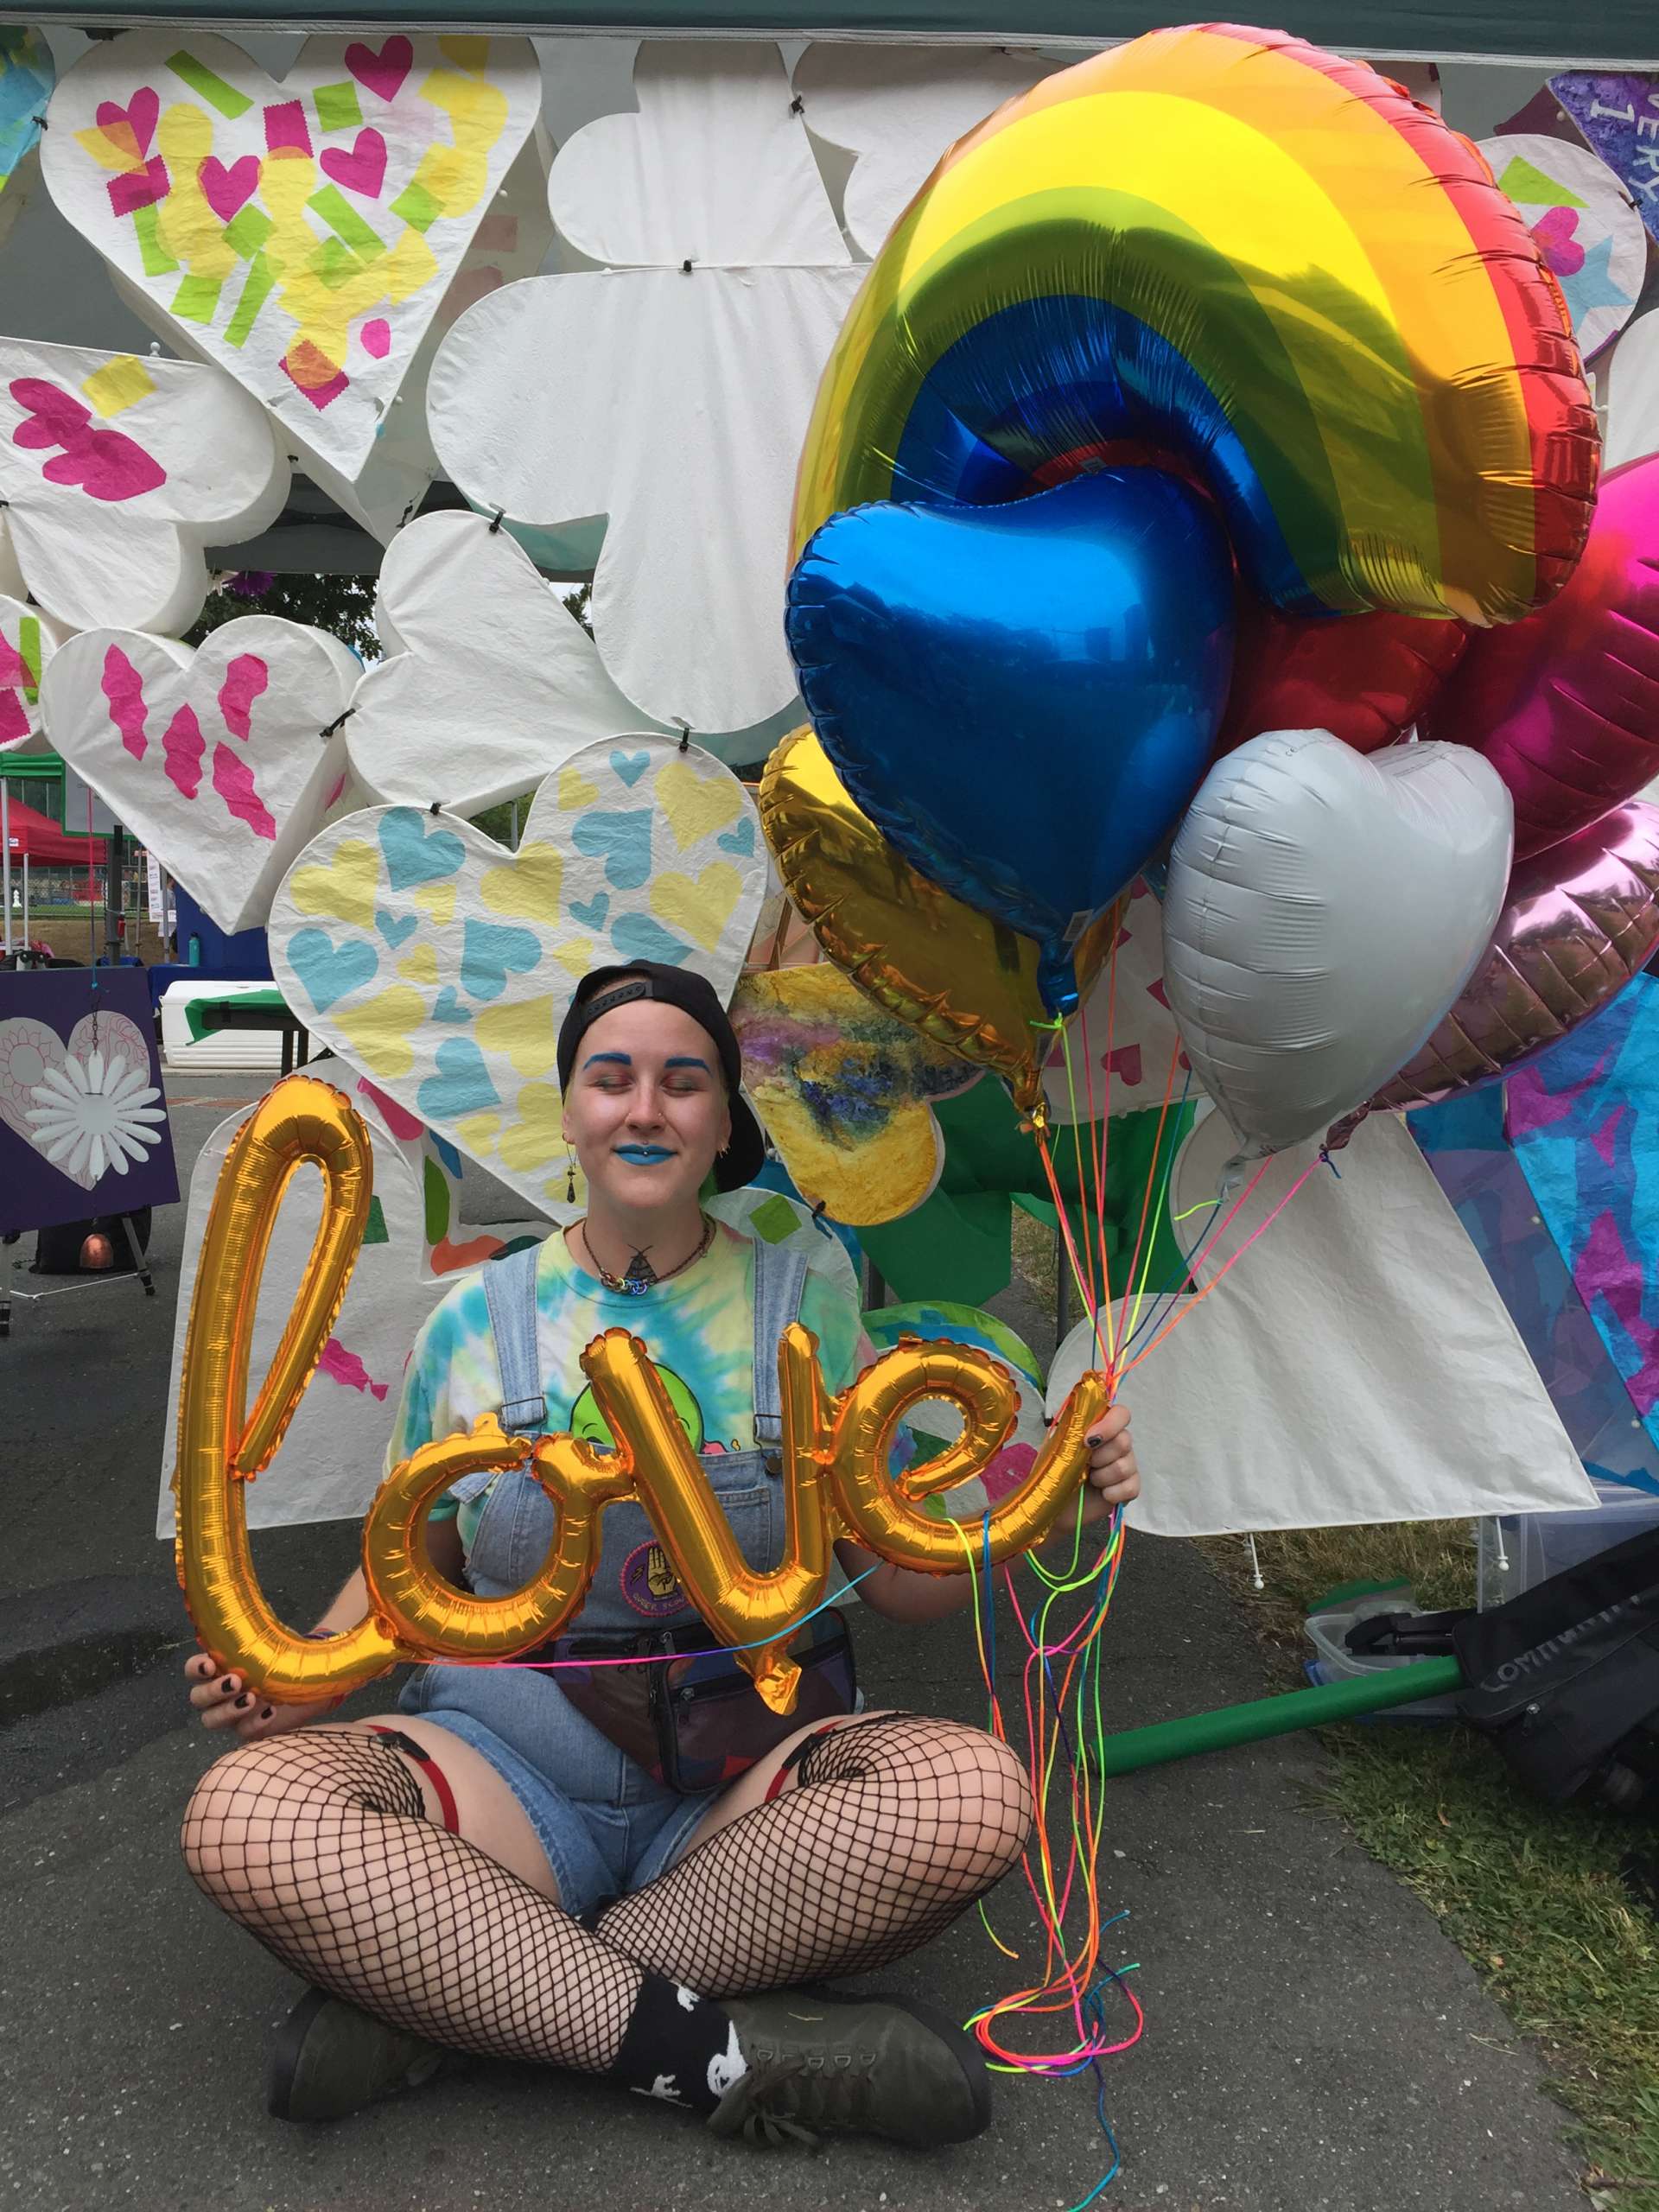 a person sitting on the ground holding a balloon that reads "love" and other coloured balloons